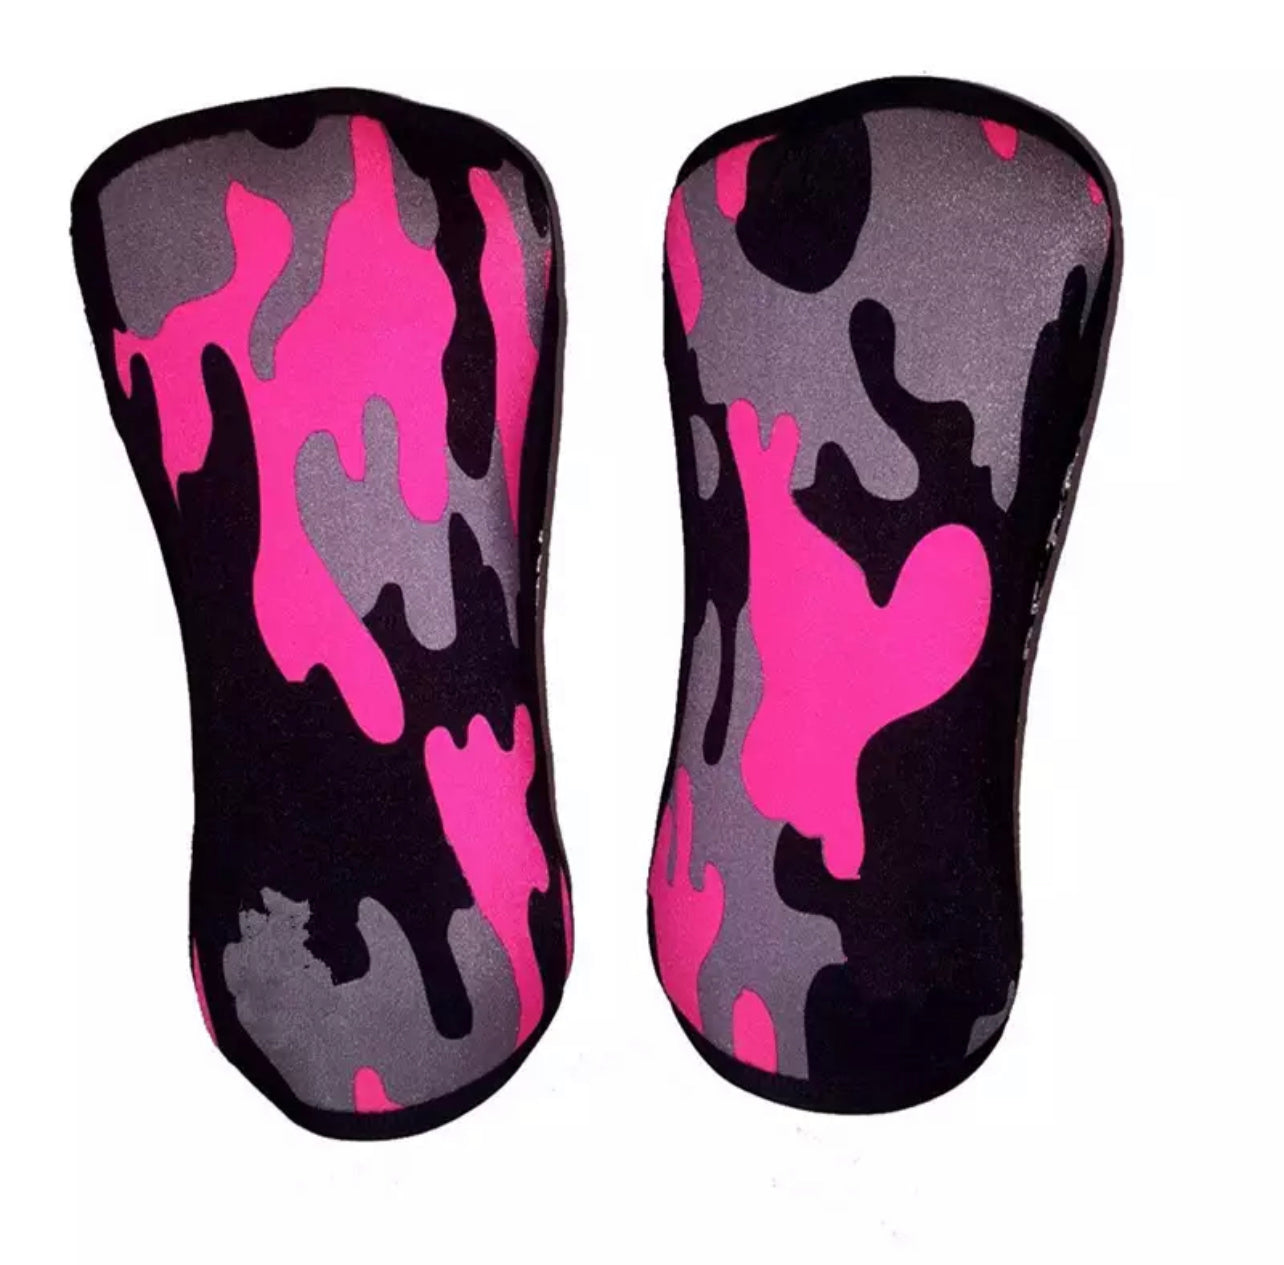 Rage Out Knee Sleeves (Pink Camo)